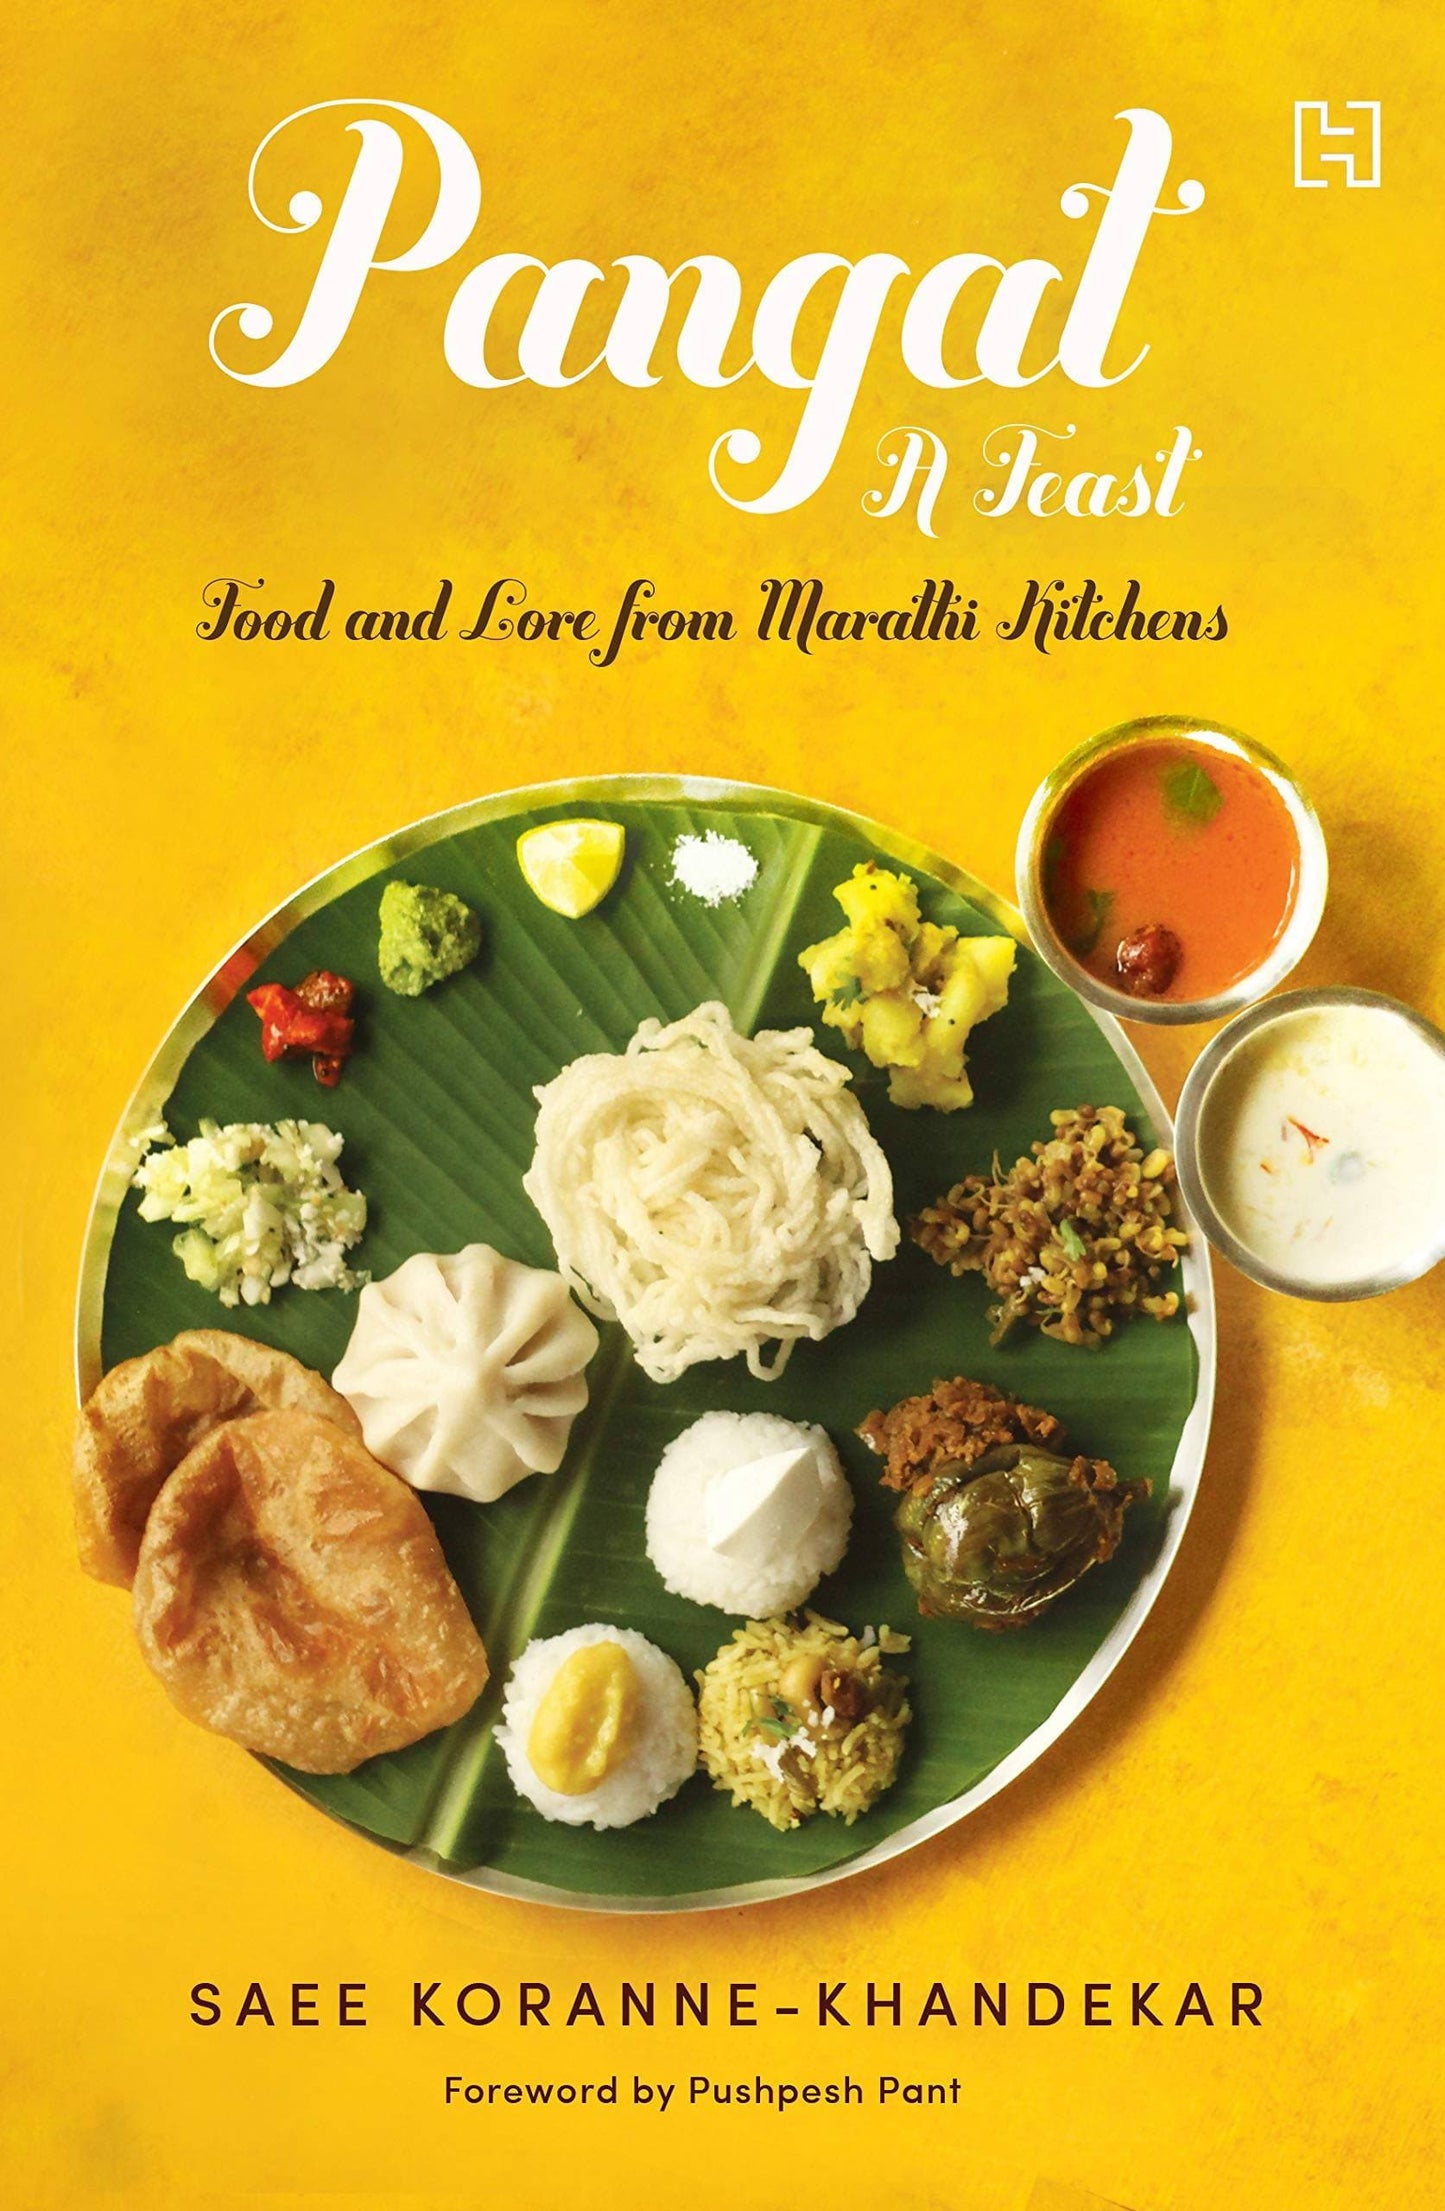 Pangat a Feast : Food and Lore from Marathi Kitchens